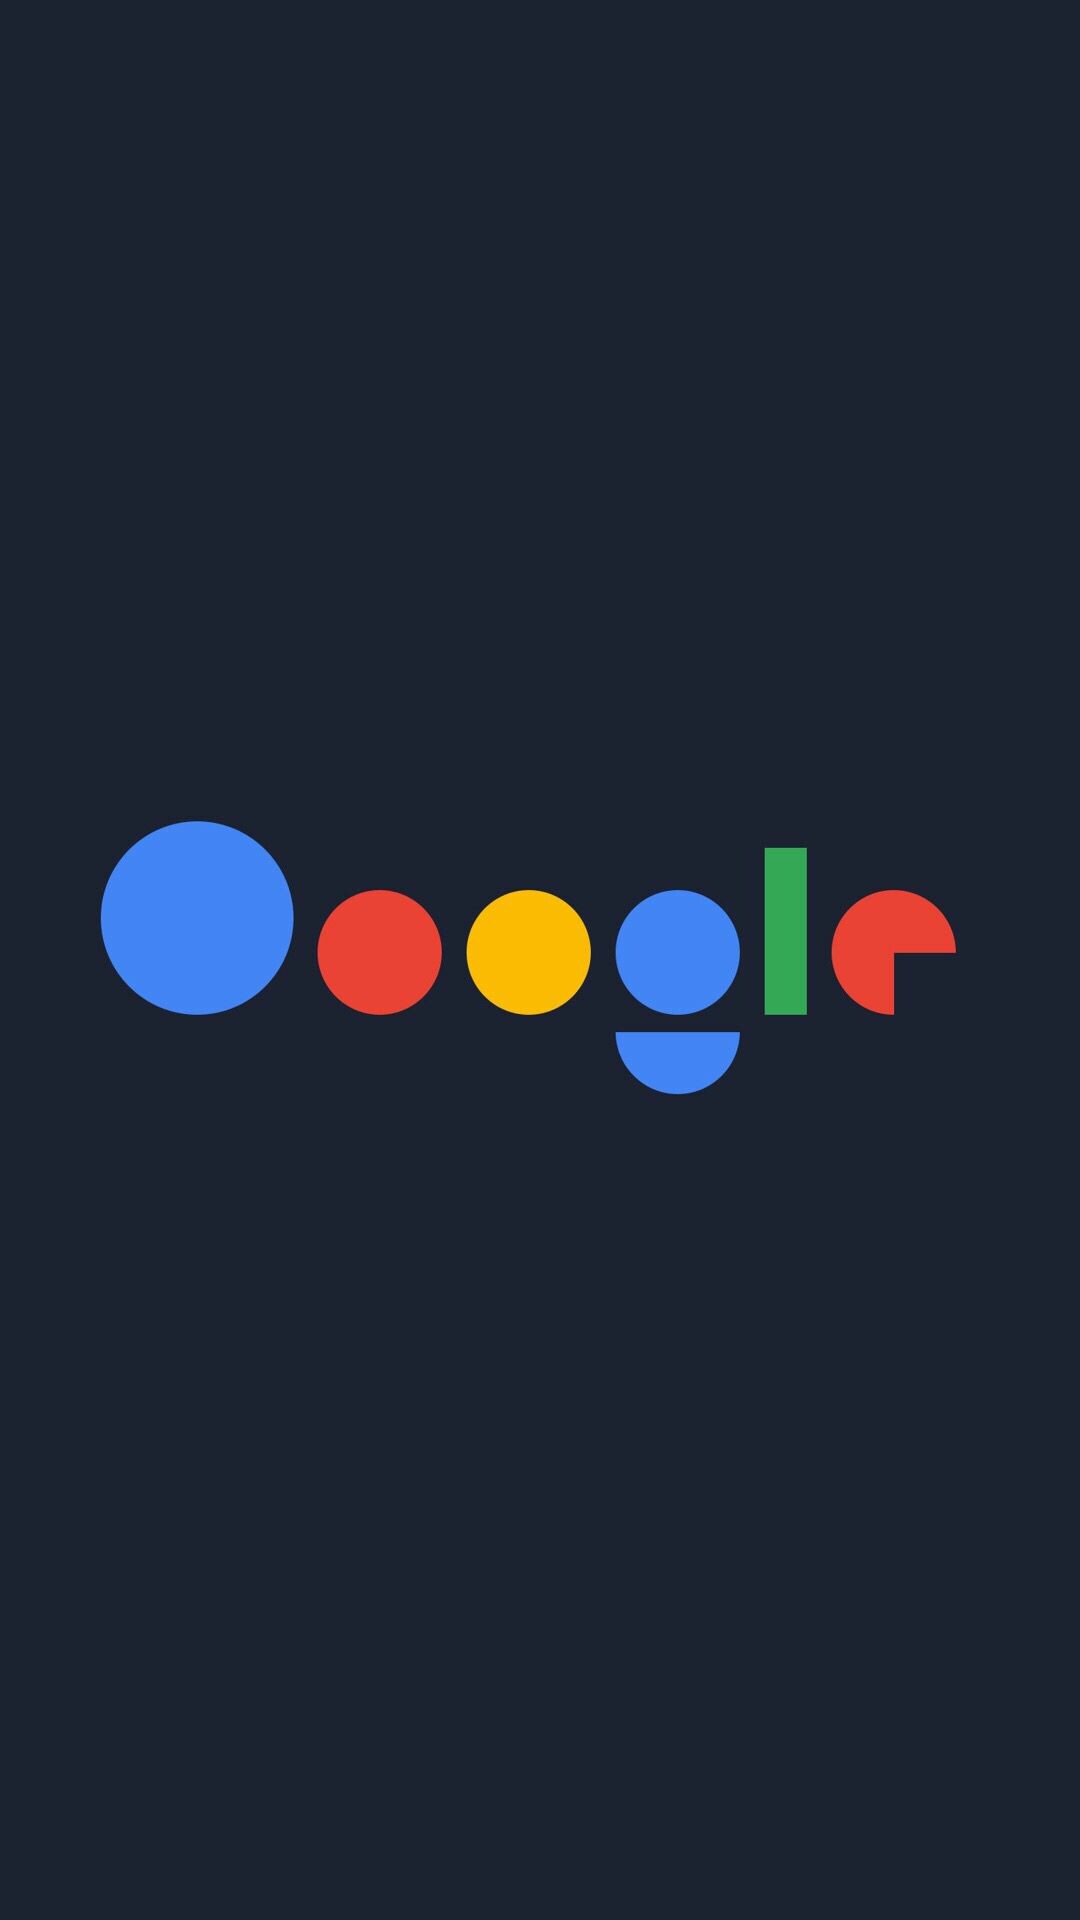 Google: One of the world's most valuable brands, Technology. 1080x1920 Full HD Background.